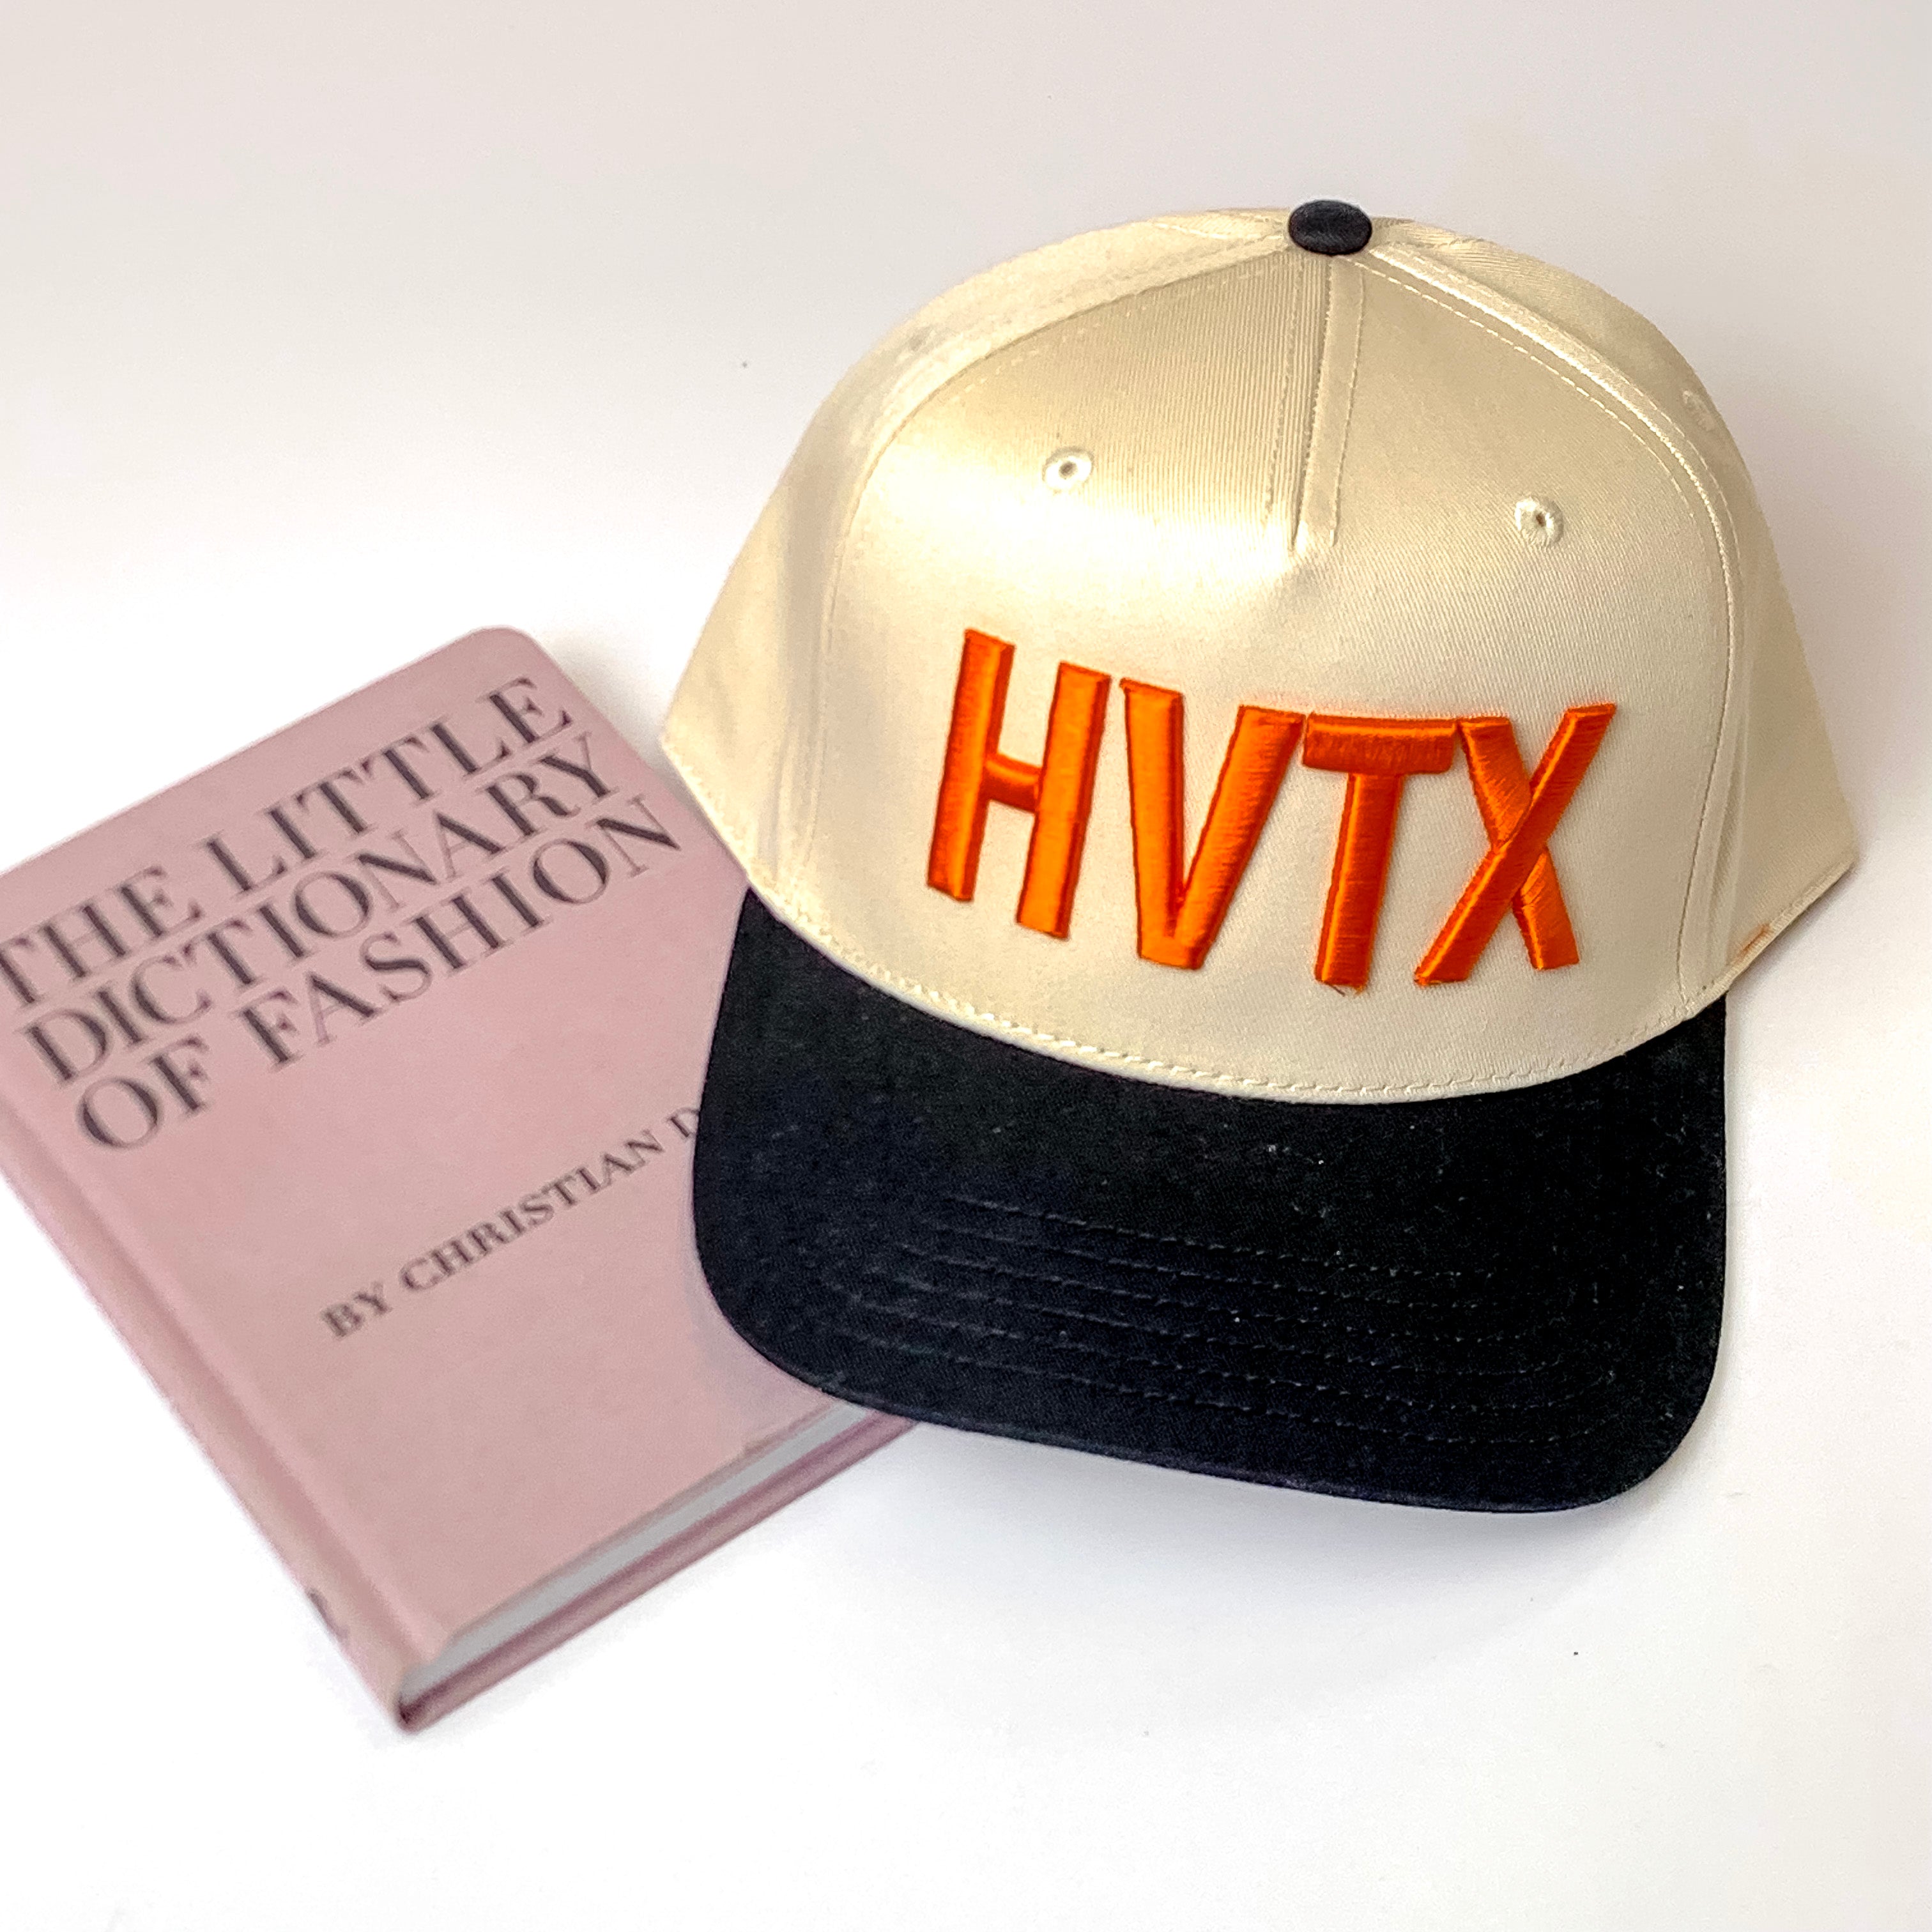 HVTX Cream and Black Trucker Hat with Orange Embroidered Puff Lettering - Giddy Up Glamour Boutique